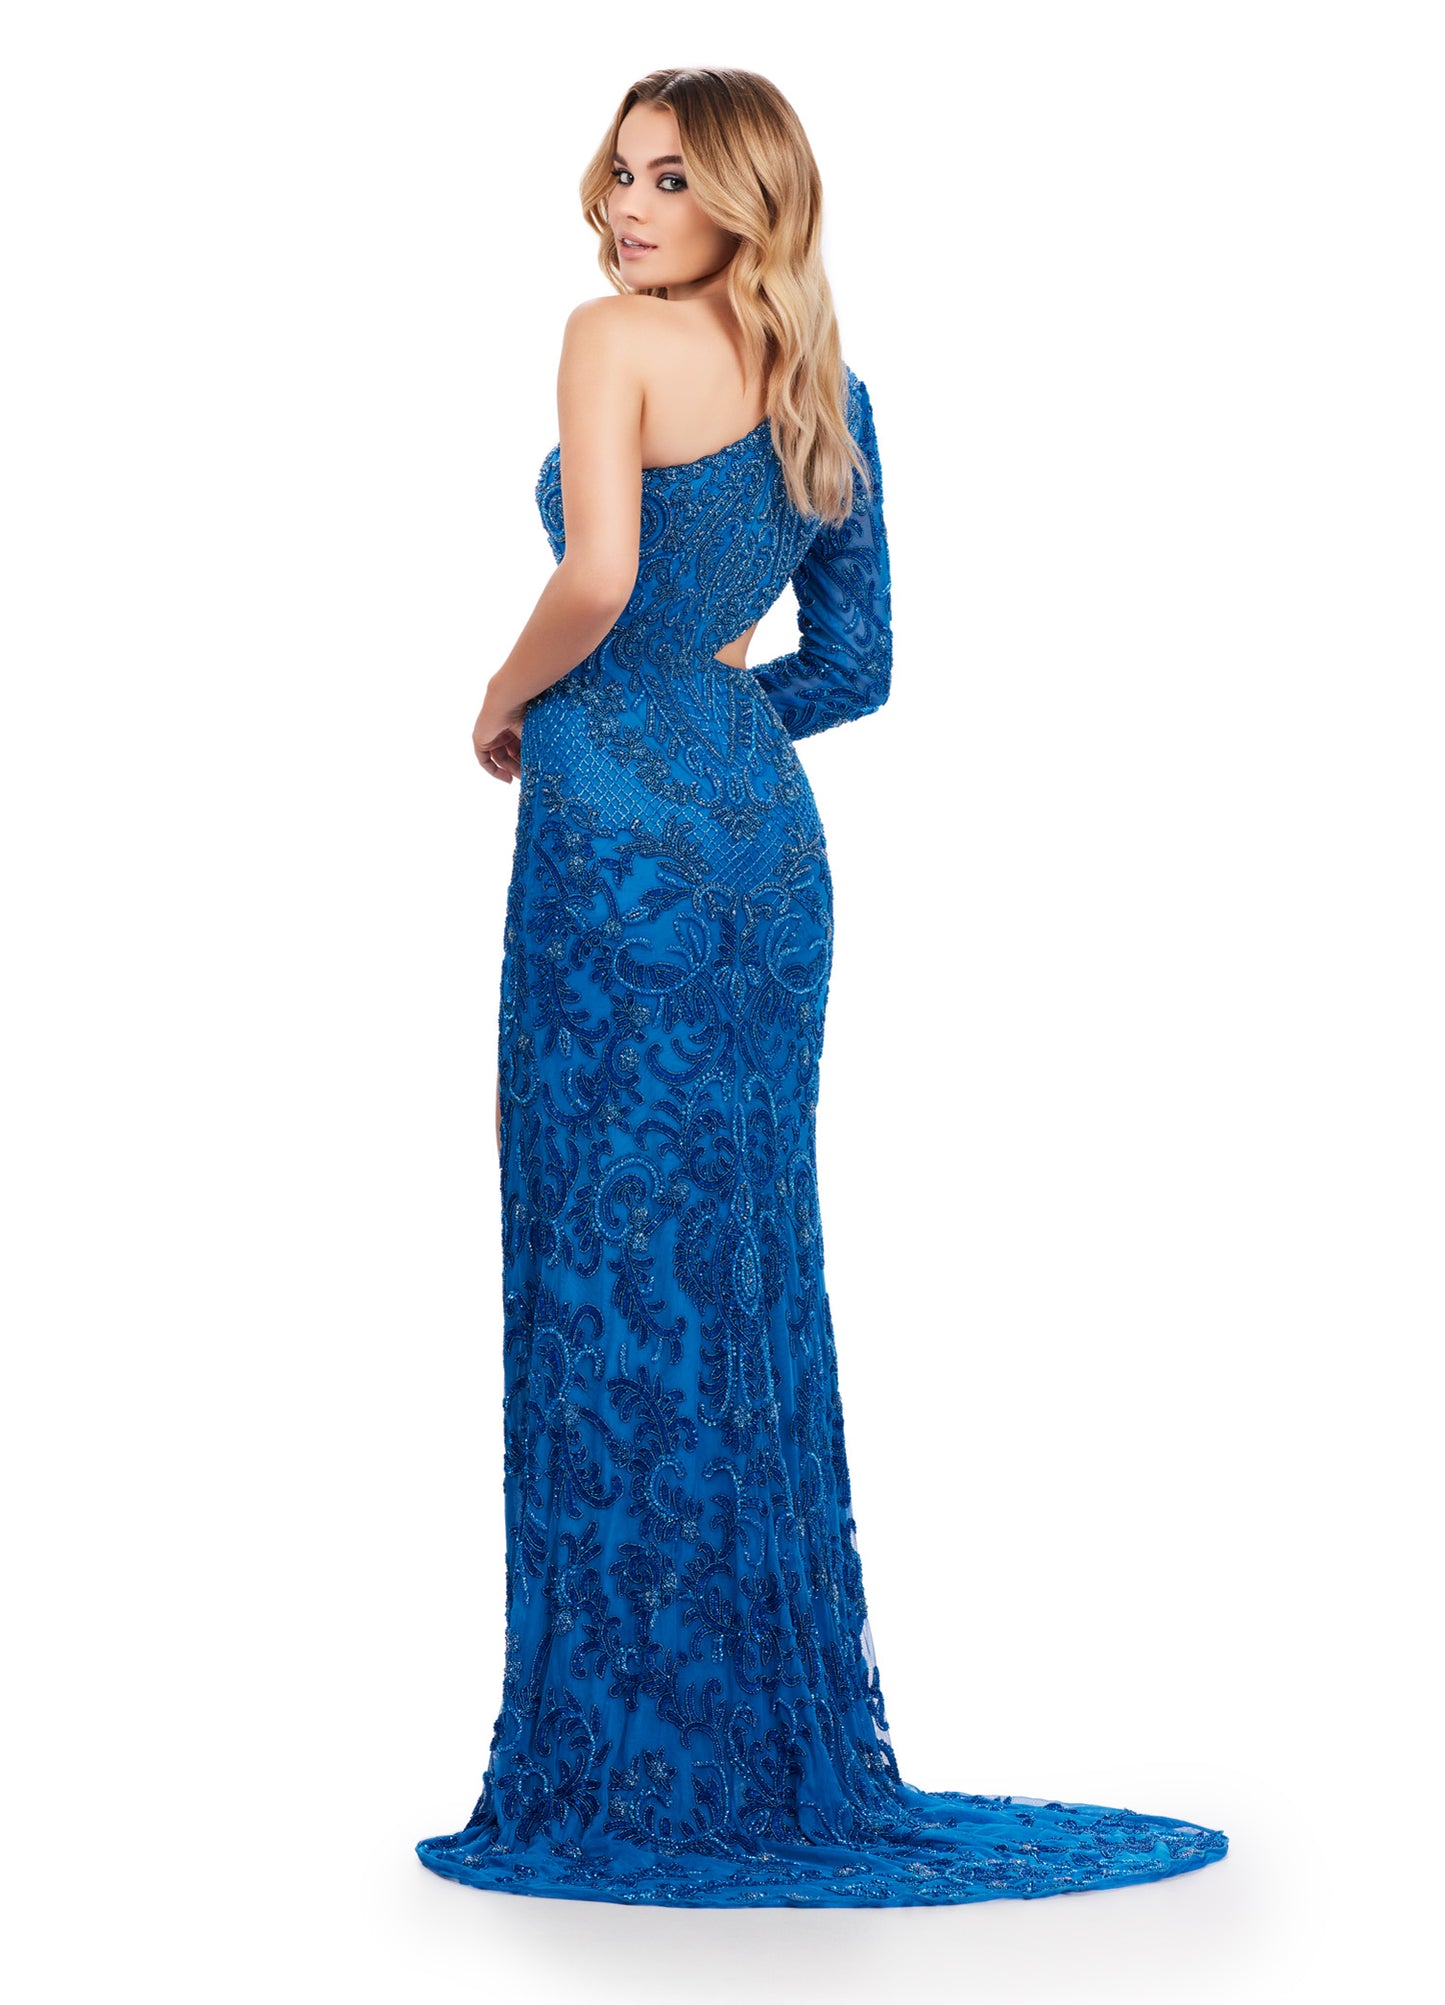 The Ashley Lauren 11649 Long Prom Dress is an elegant and unique choice for any formal occasion. The one shoulder design is complemented by a striking one sleeve cut out and intricate beaded detailing. The feather cuff adds a touch of glamour to this stunning pageant gown. Make an entrance in this fully beaded gown. This intricately beaded one shoulder gown is accented by side cut out and feather cuff sleeve. The look is complete with a sweep train and left leg slit.